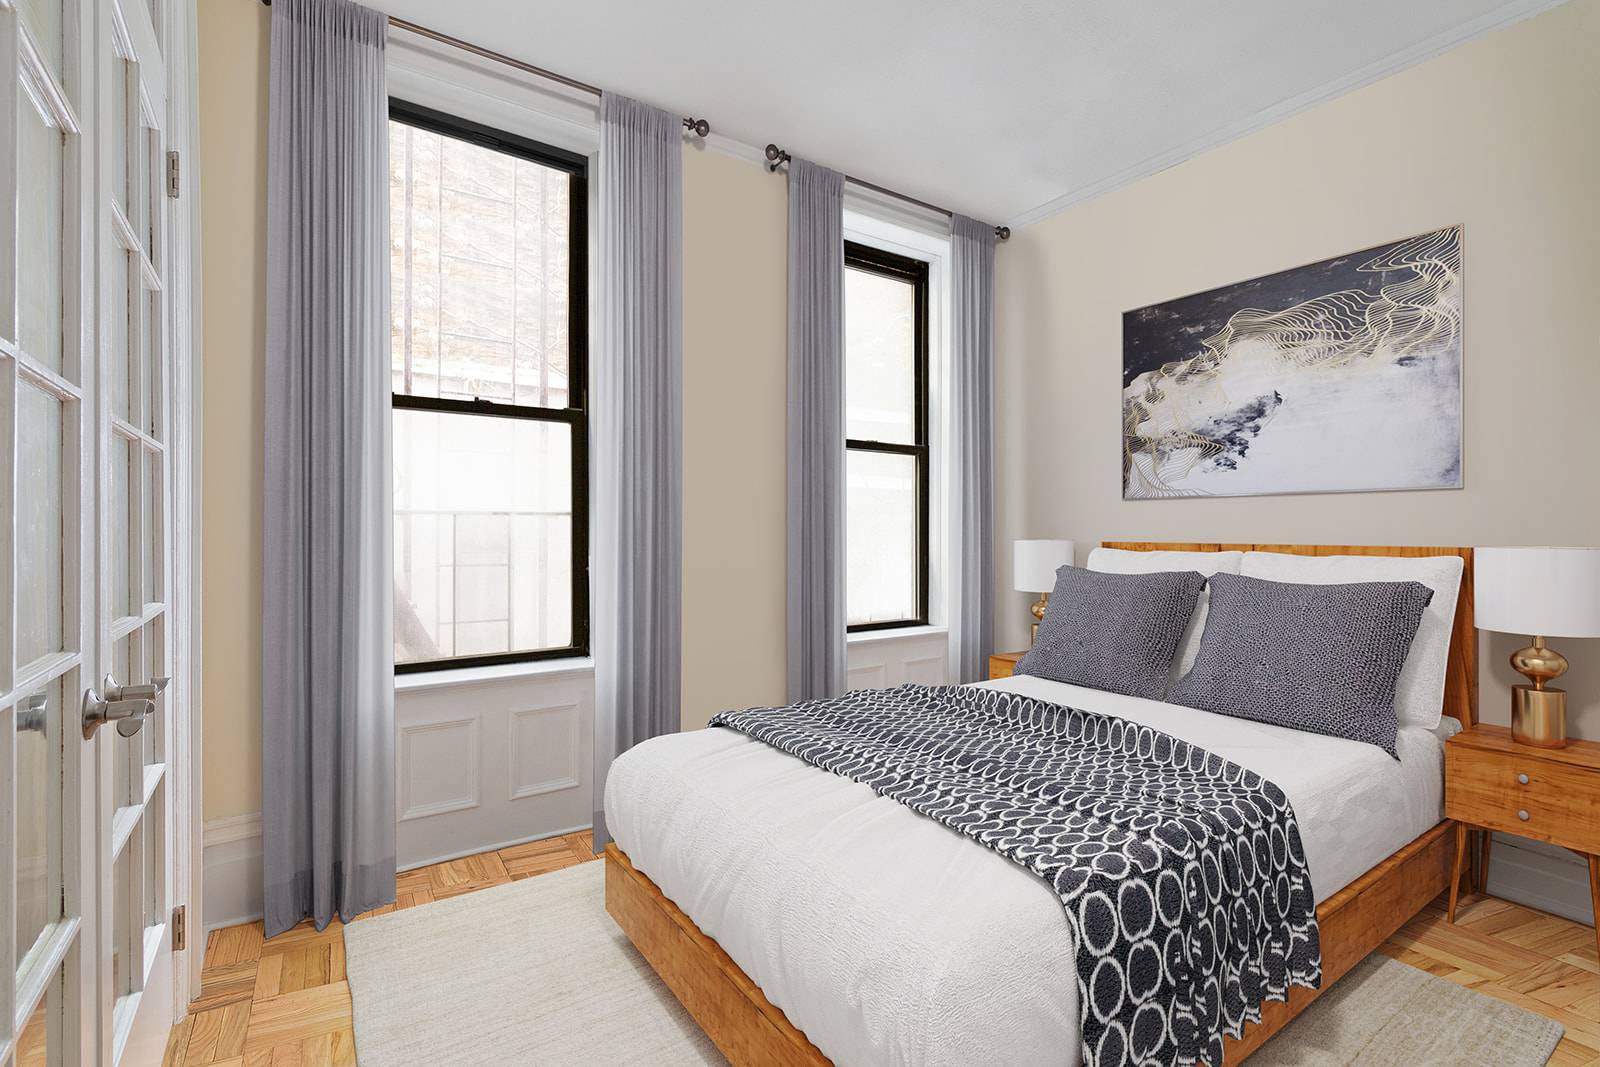 A beautifully renovated, converted two bedroom one block from Riverside Park and the best restaurants in Morningside Heights.